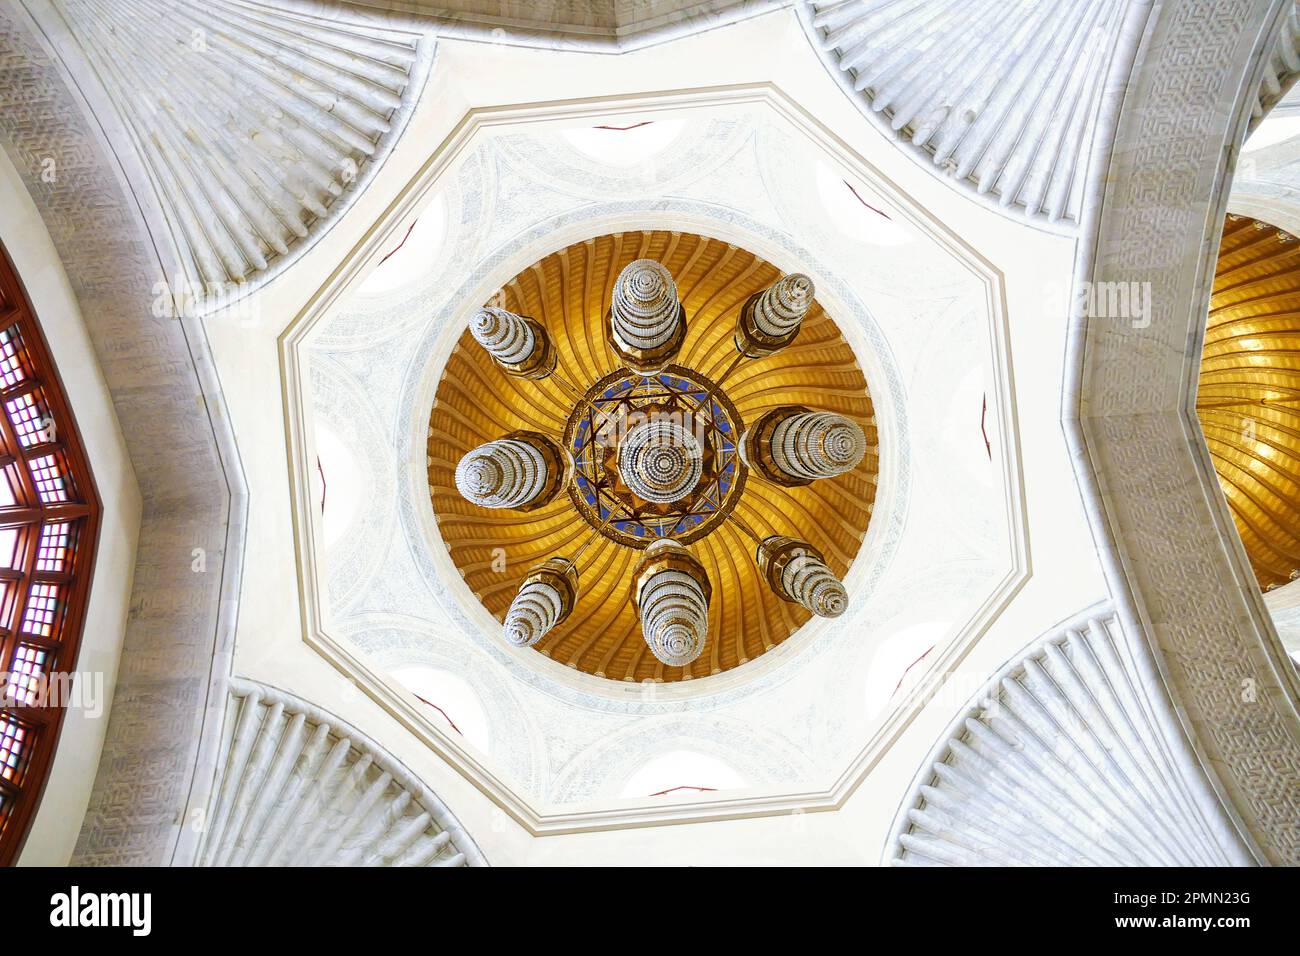 The ceiling with beautiful chandelier close-up of an mosque indoor in Muscat, Oman Stock Photo